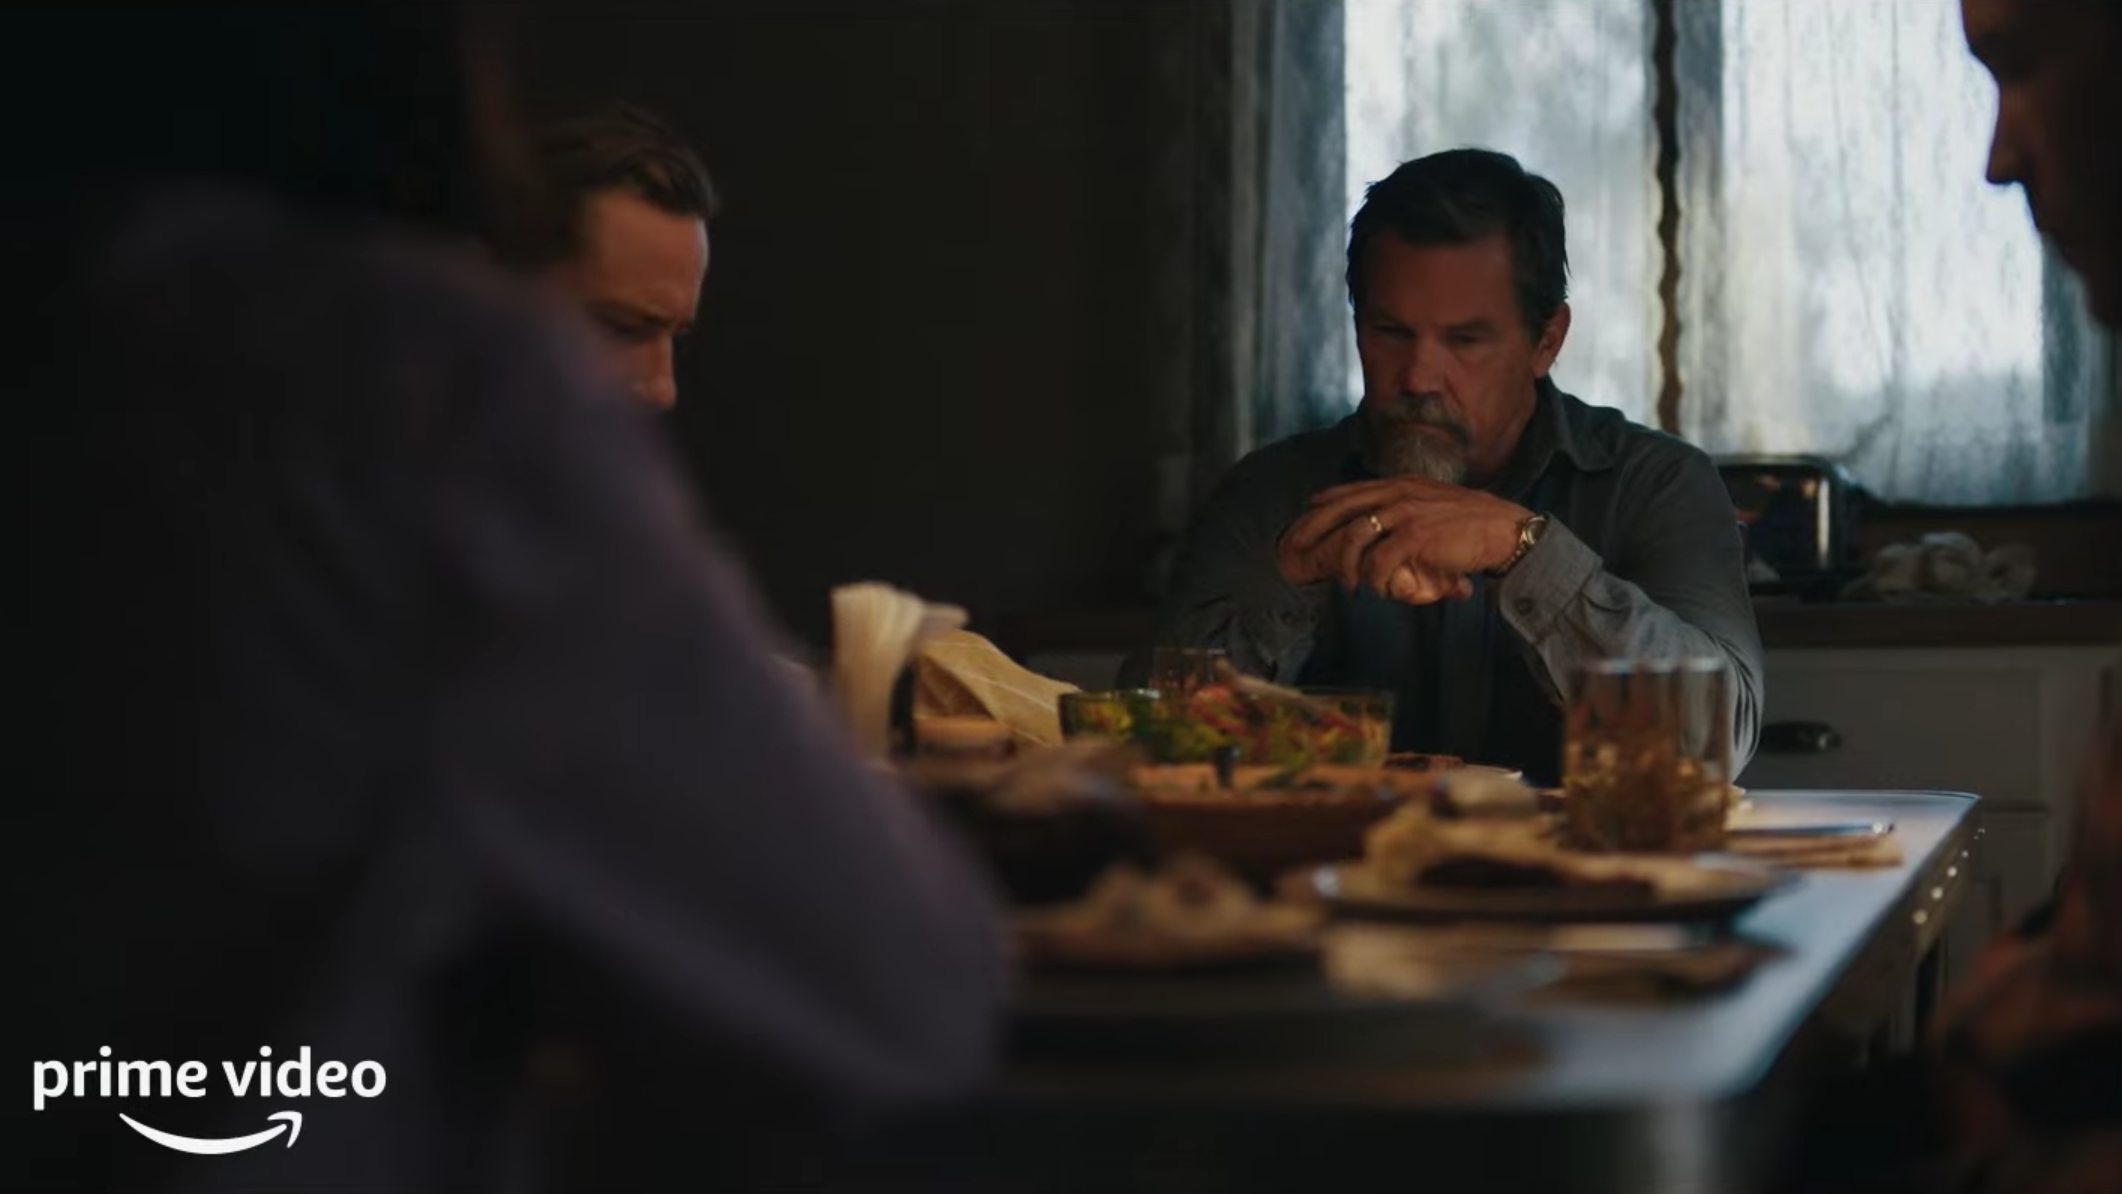 Josh Brolin enters the void in Prime Video’s Outer Range